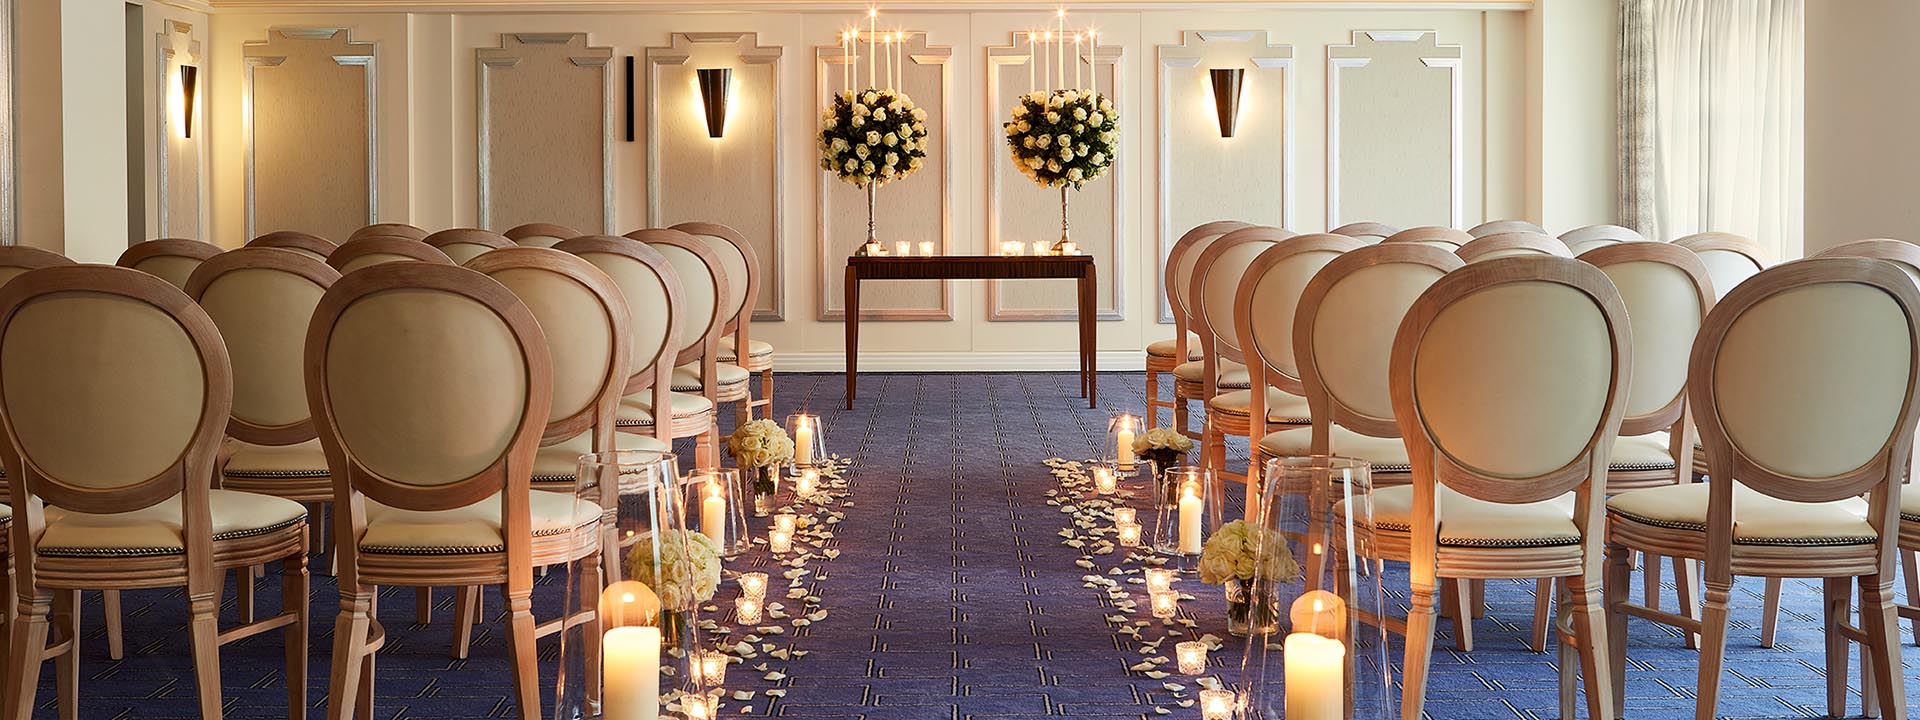 Part of the Clarence Room, in Art Deco design, decorated with candles and flowers perfect for a wedding.